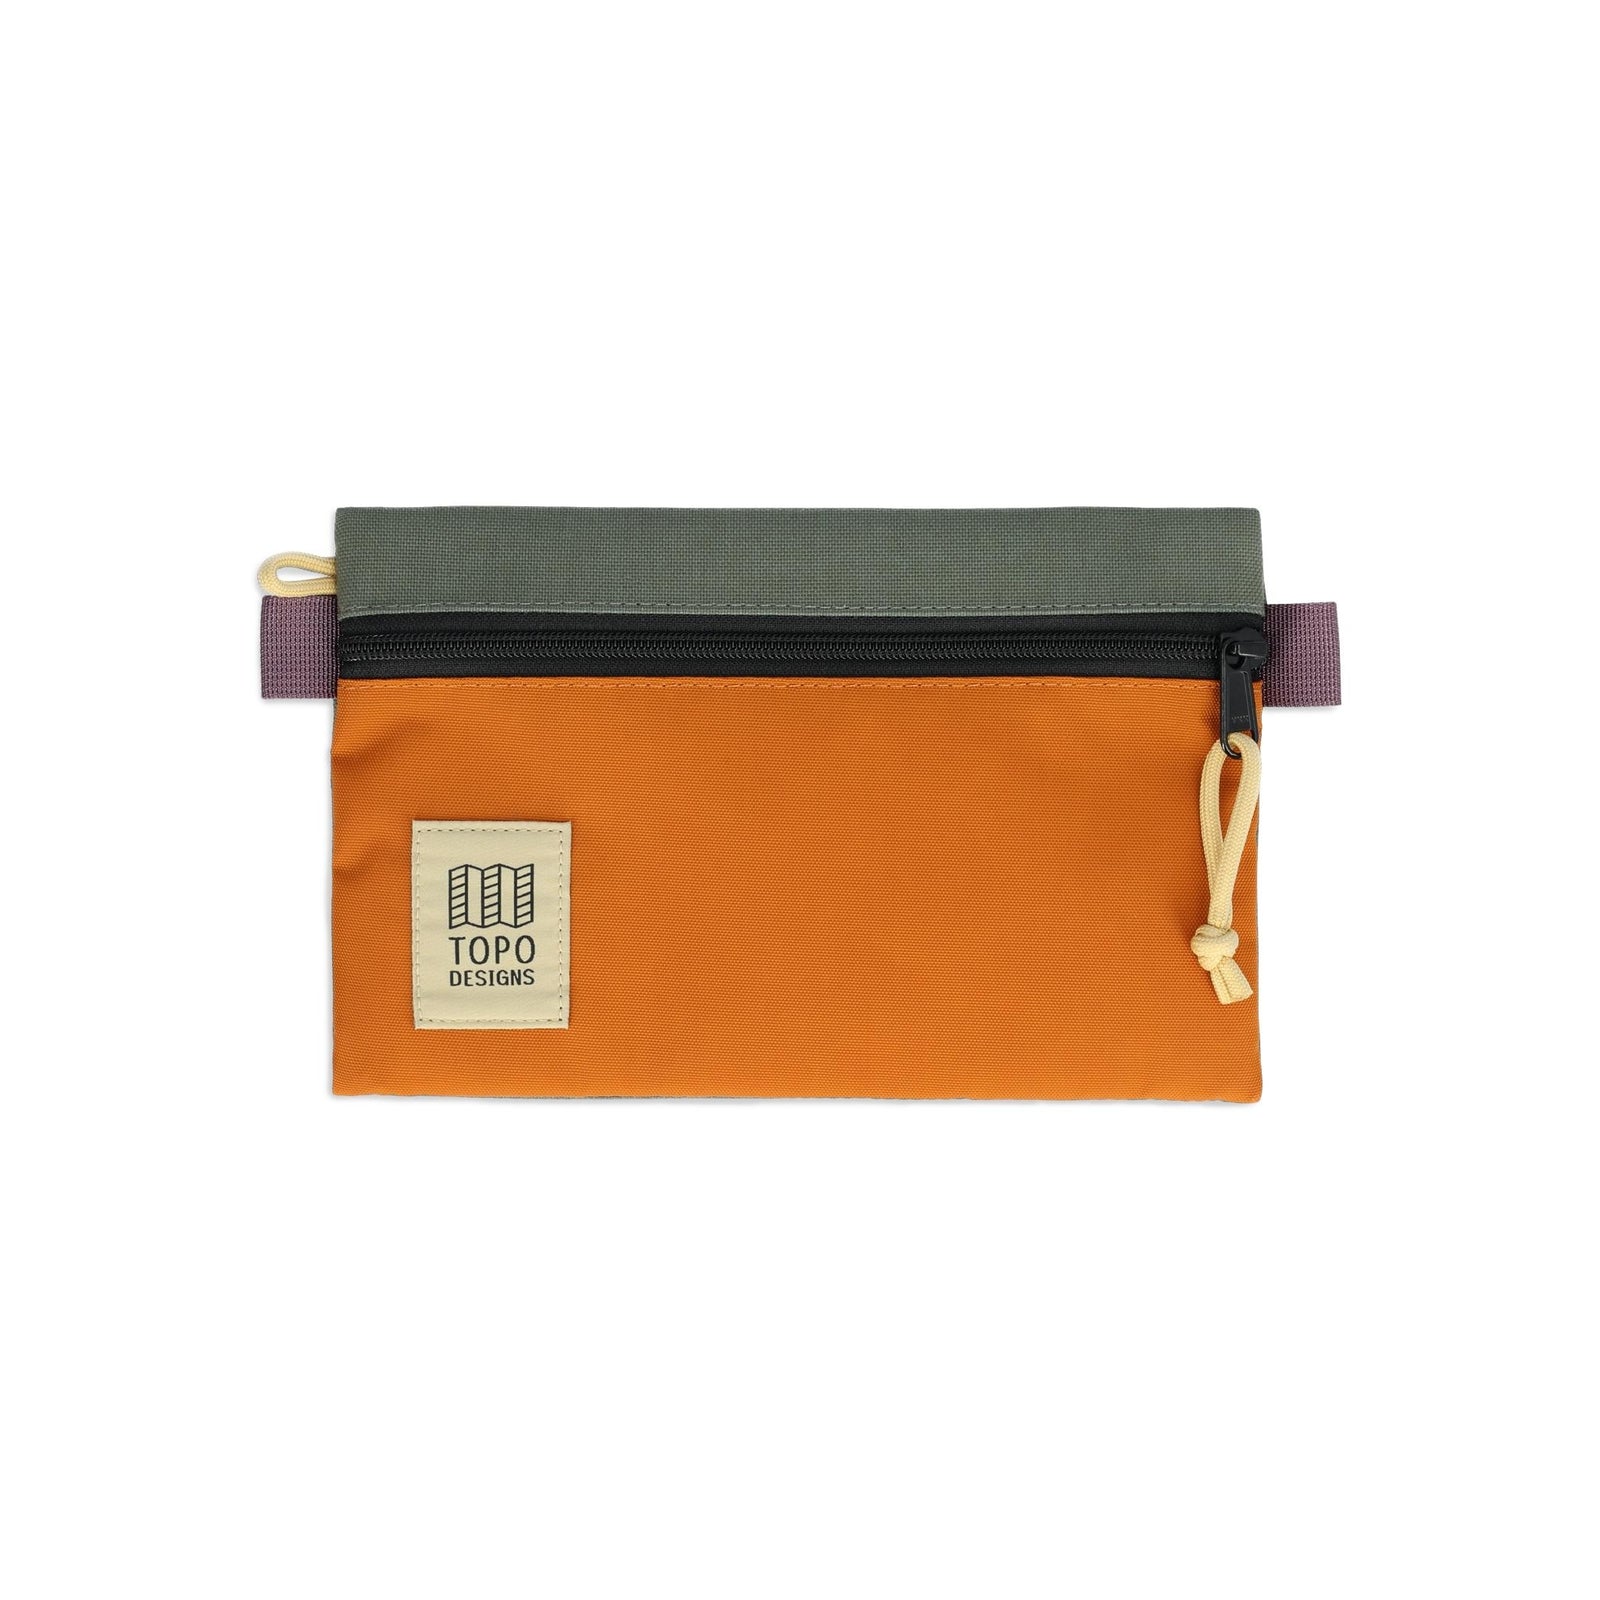 Front View of Topo Designs Accessory Bags in "Small" "Beetle / Spice"